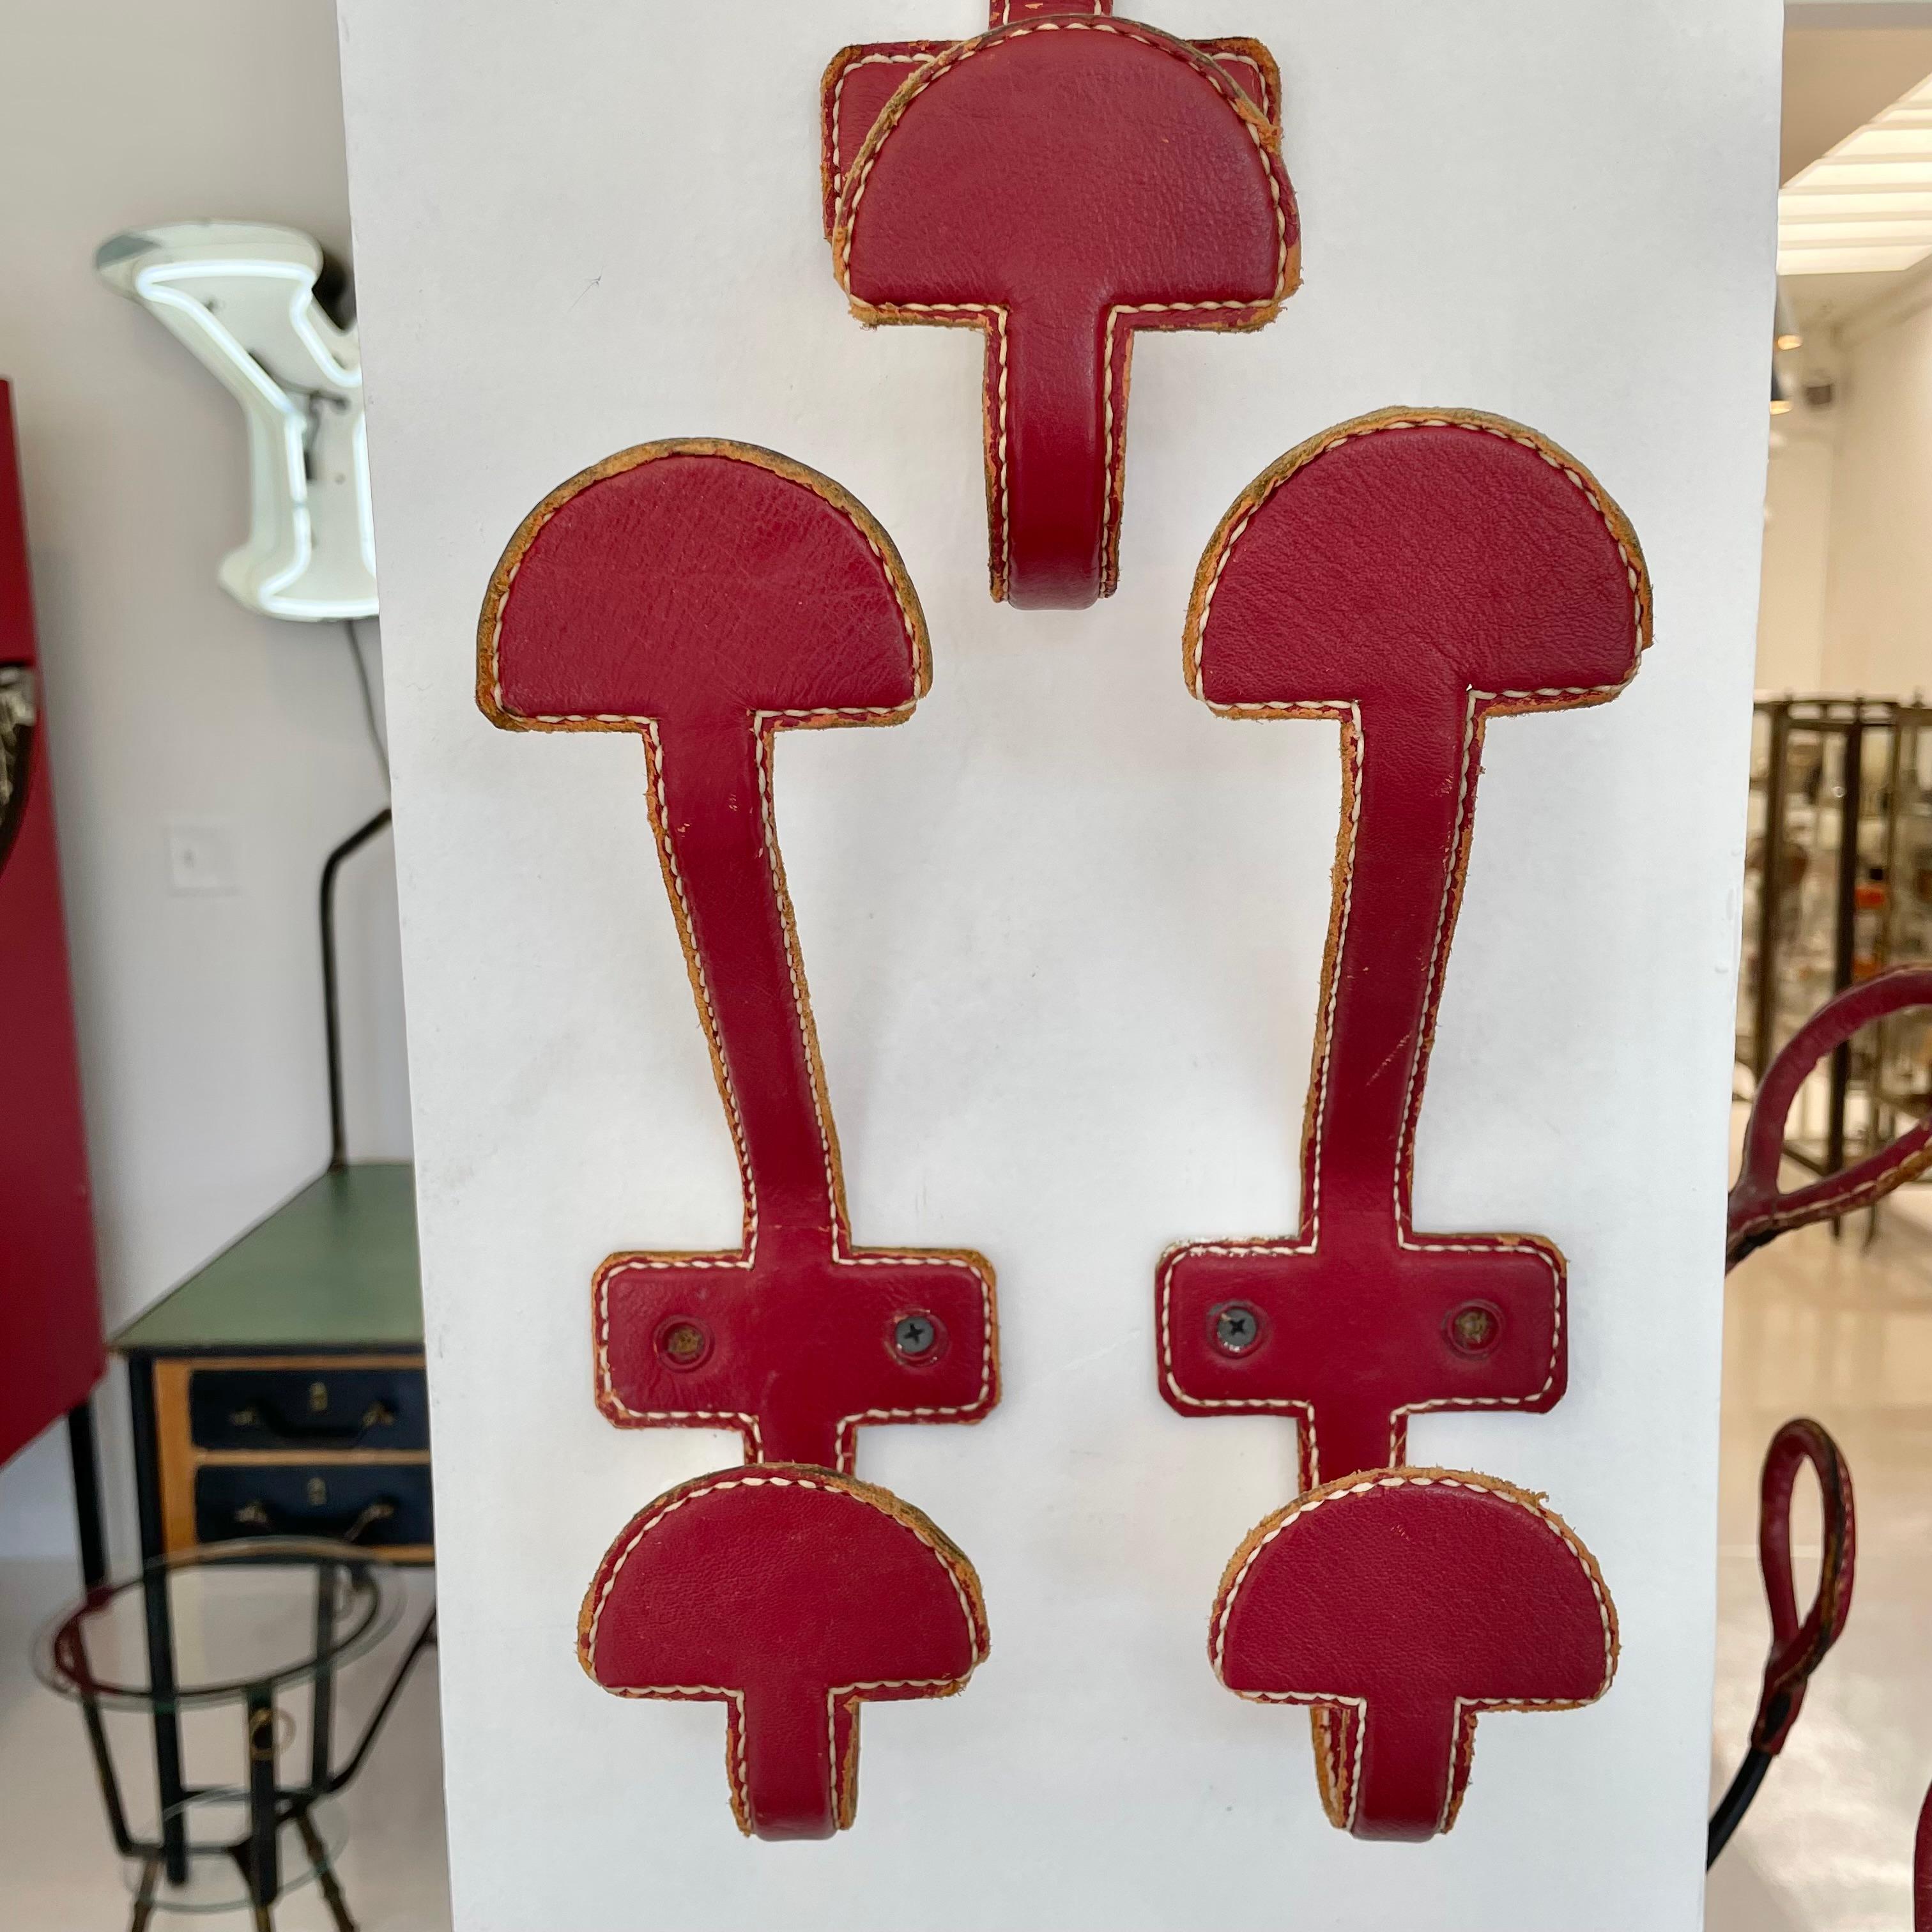 Mid-20th Century Set of 3 Jacques Adnet Red Leather Coat Hooks, 1950s France For Sale